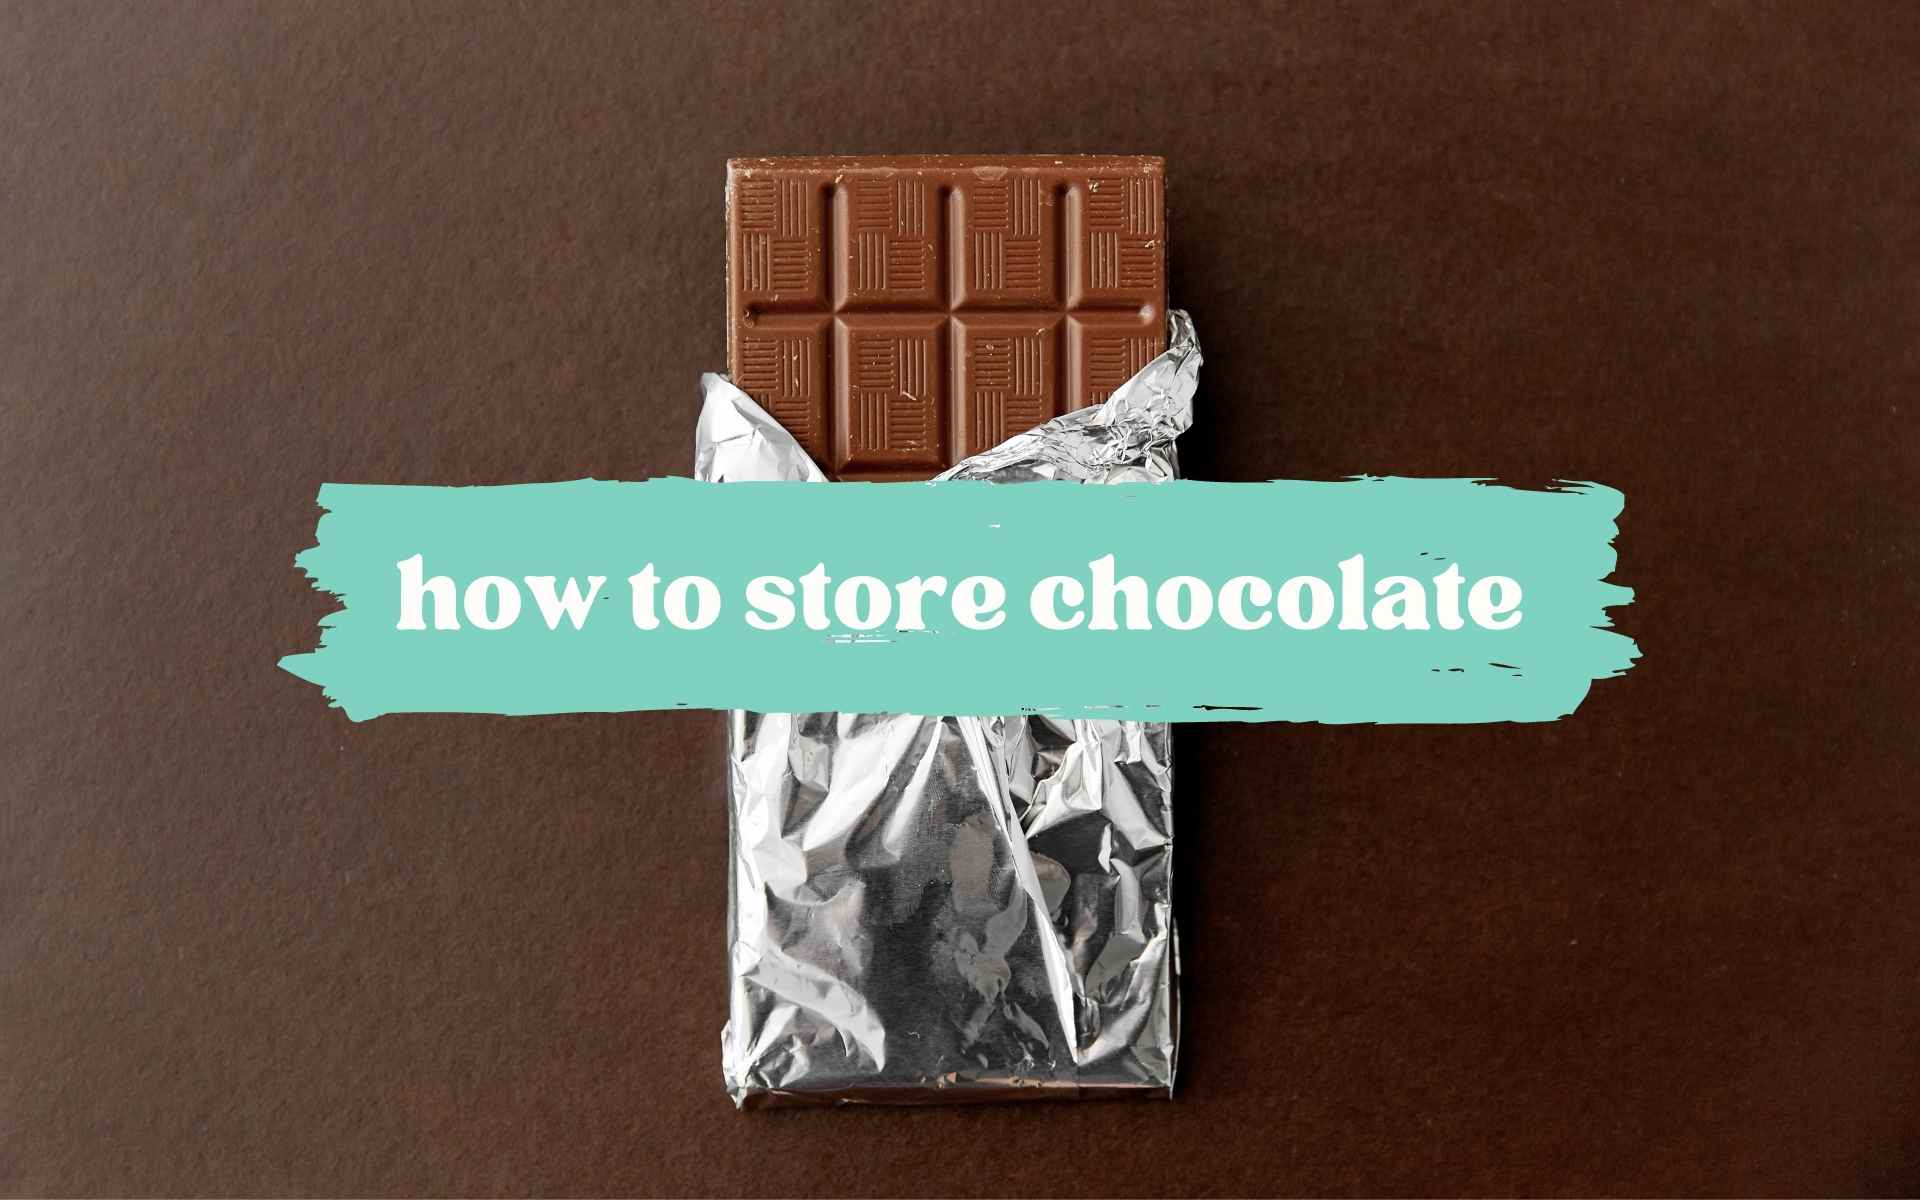 https://readcacao.com/wp-content/uploads/2021/04/how-to-store-chocolate-thumbnail.jpg